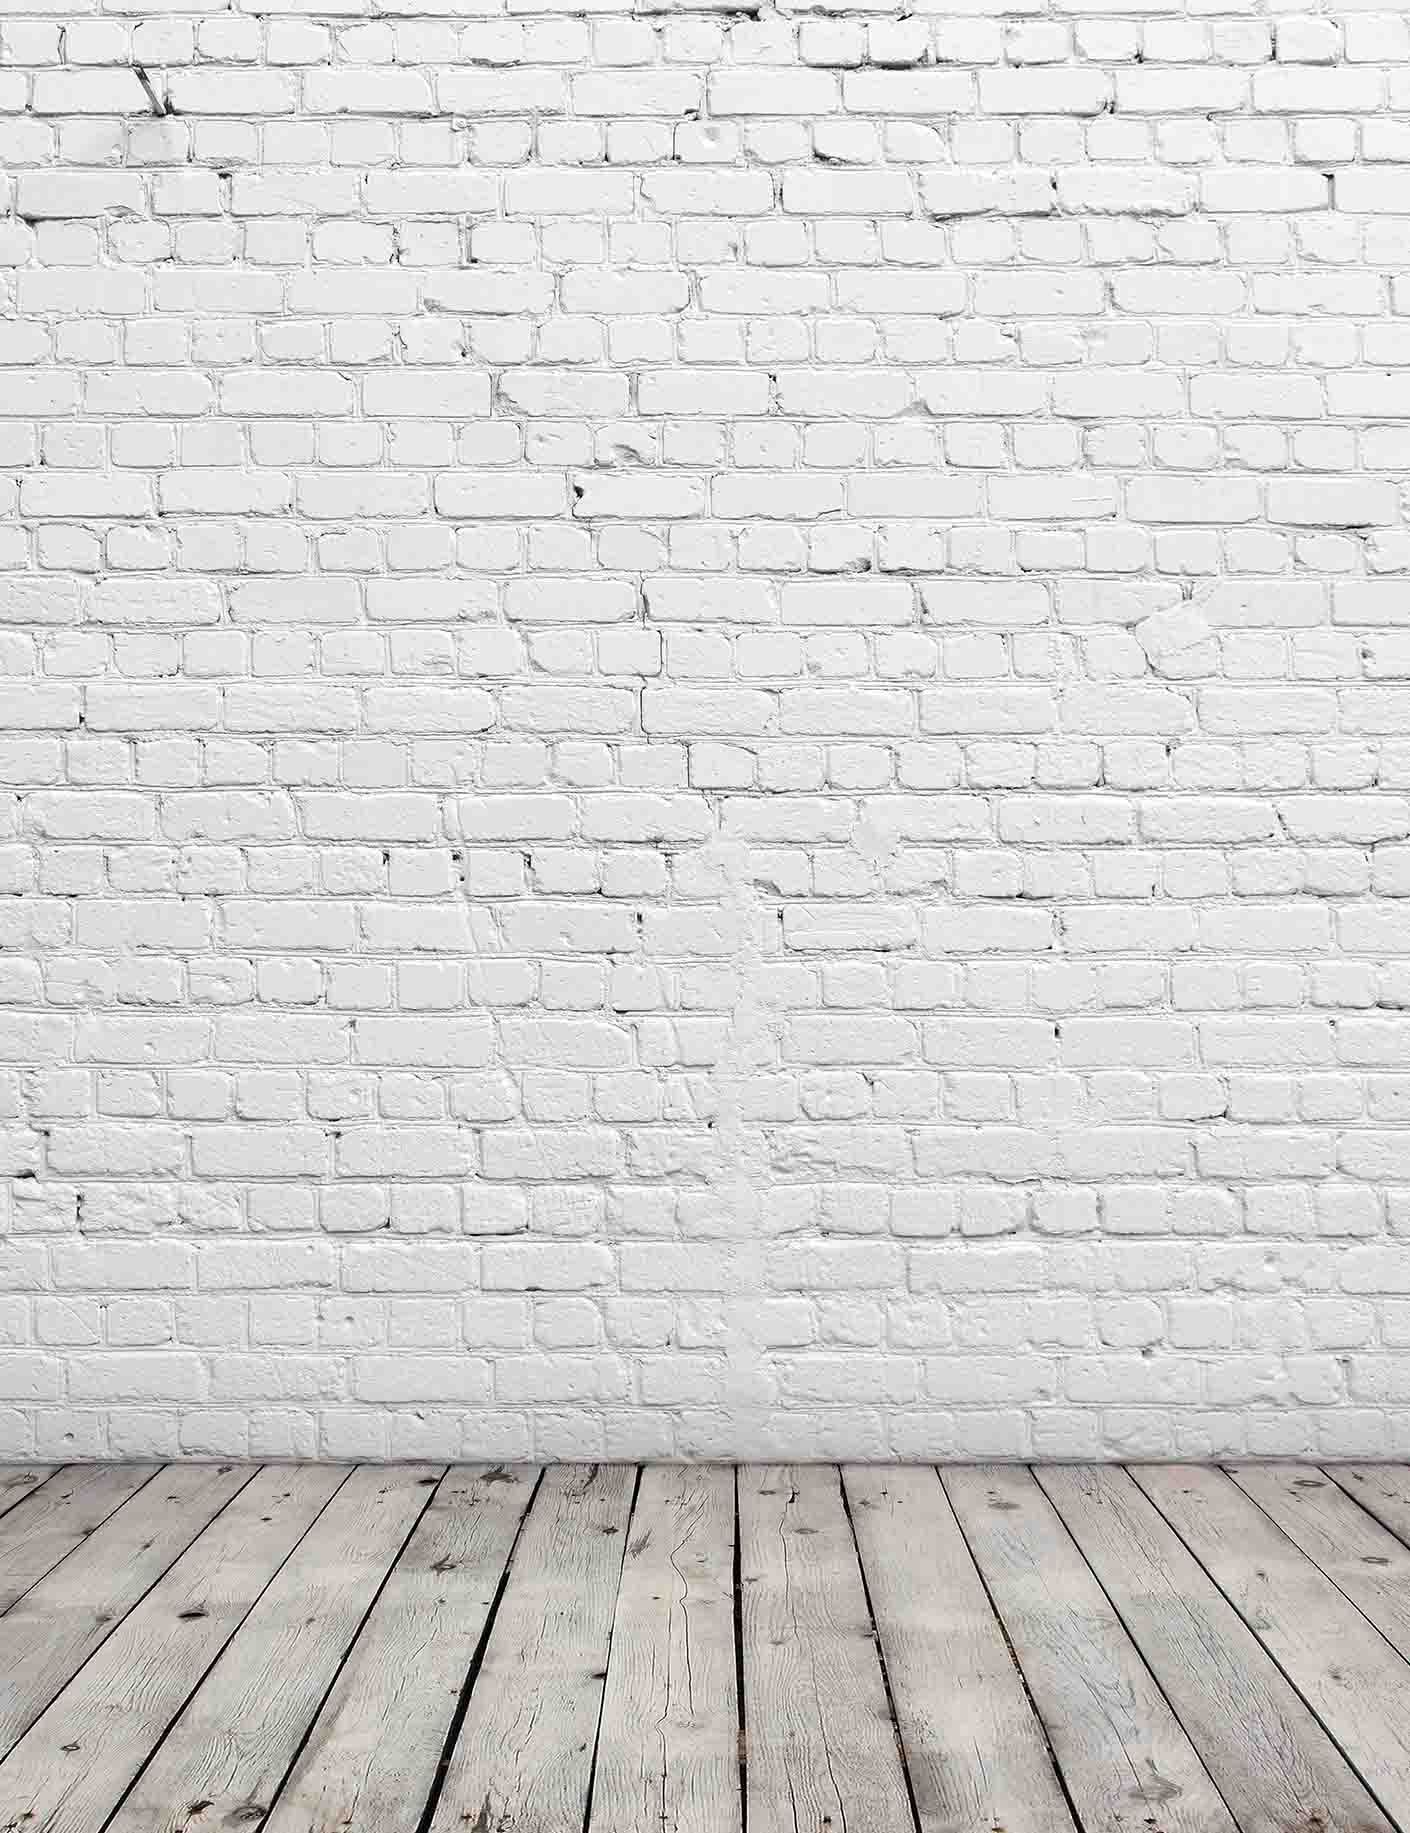 Senior White Stucco Brick Wall With Old Wood Floor Texture Photography Backdrop Shopbackdrop